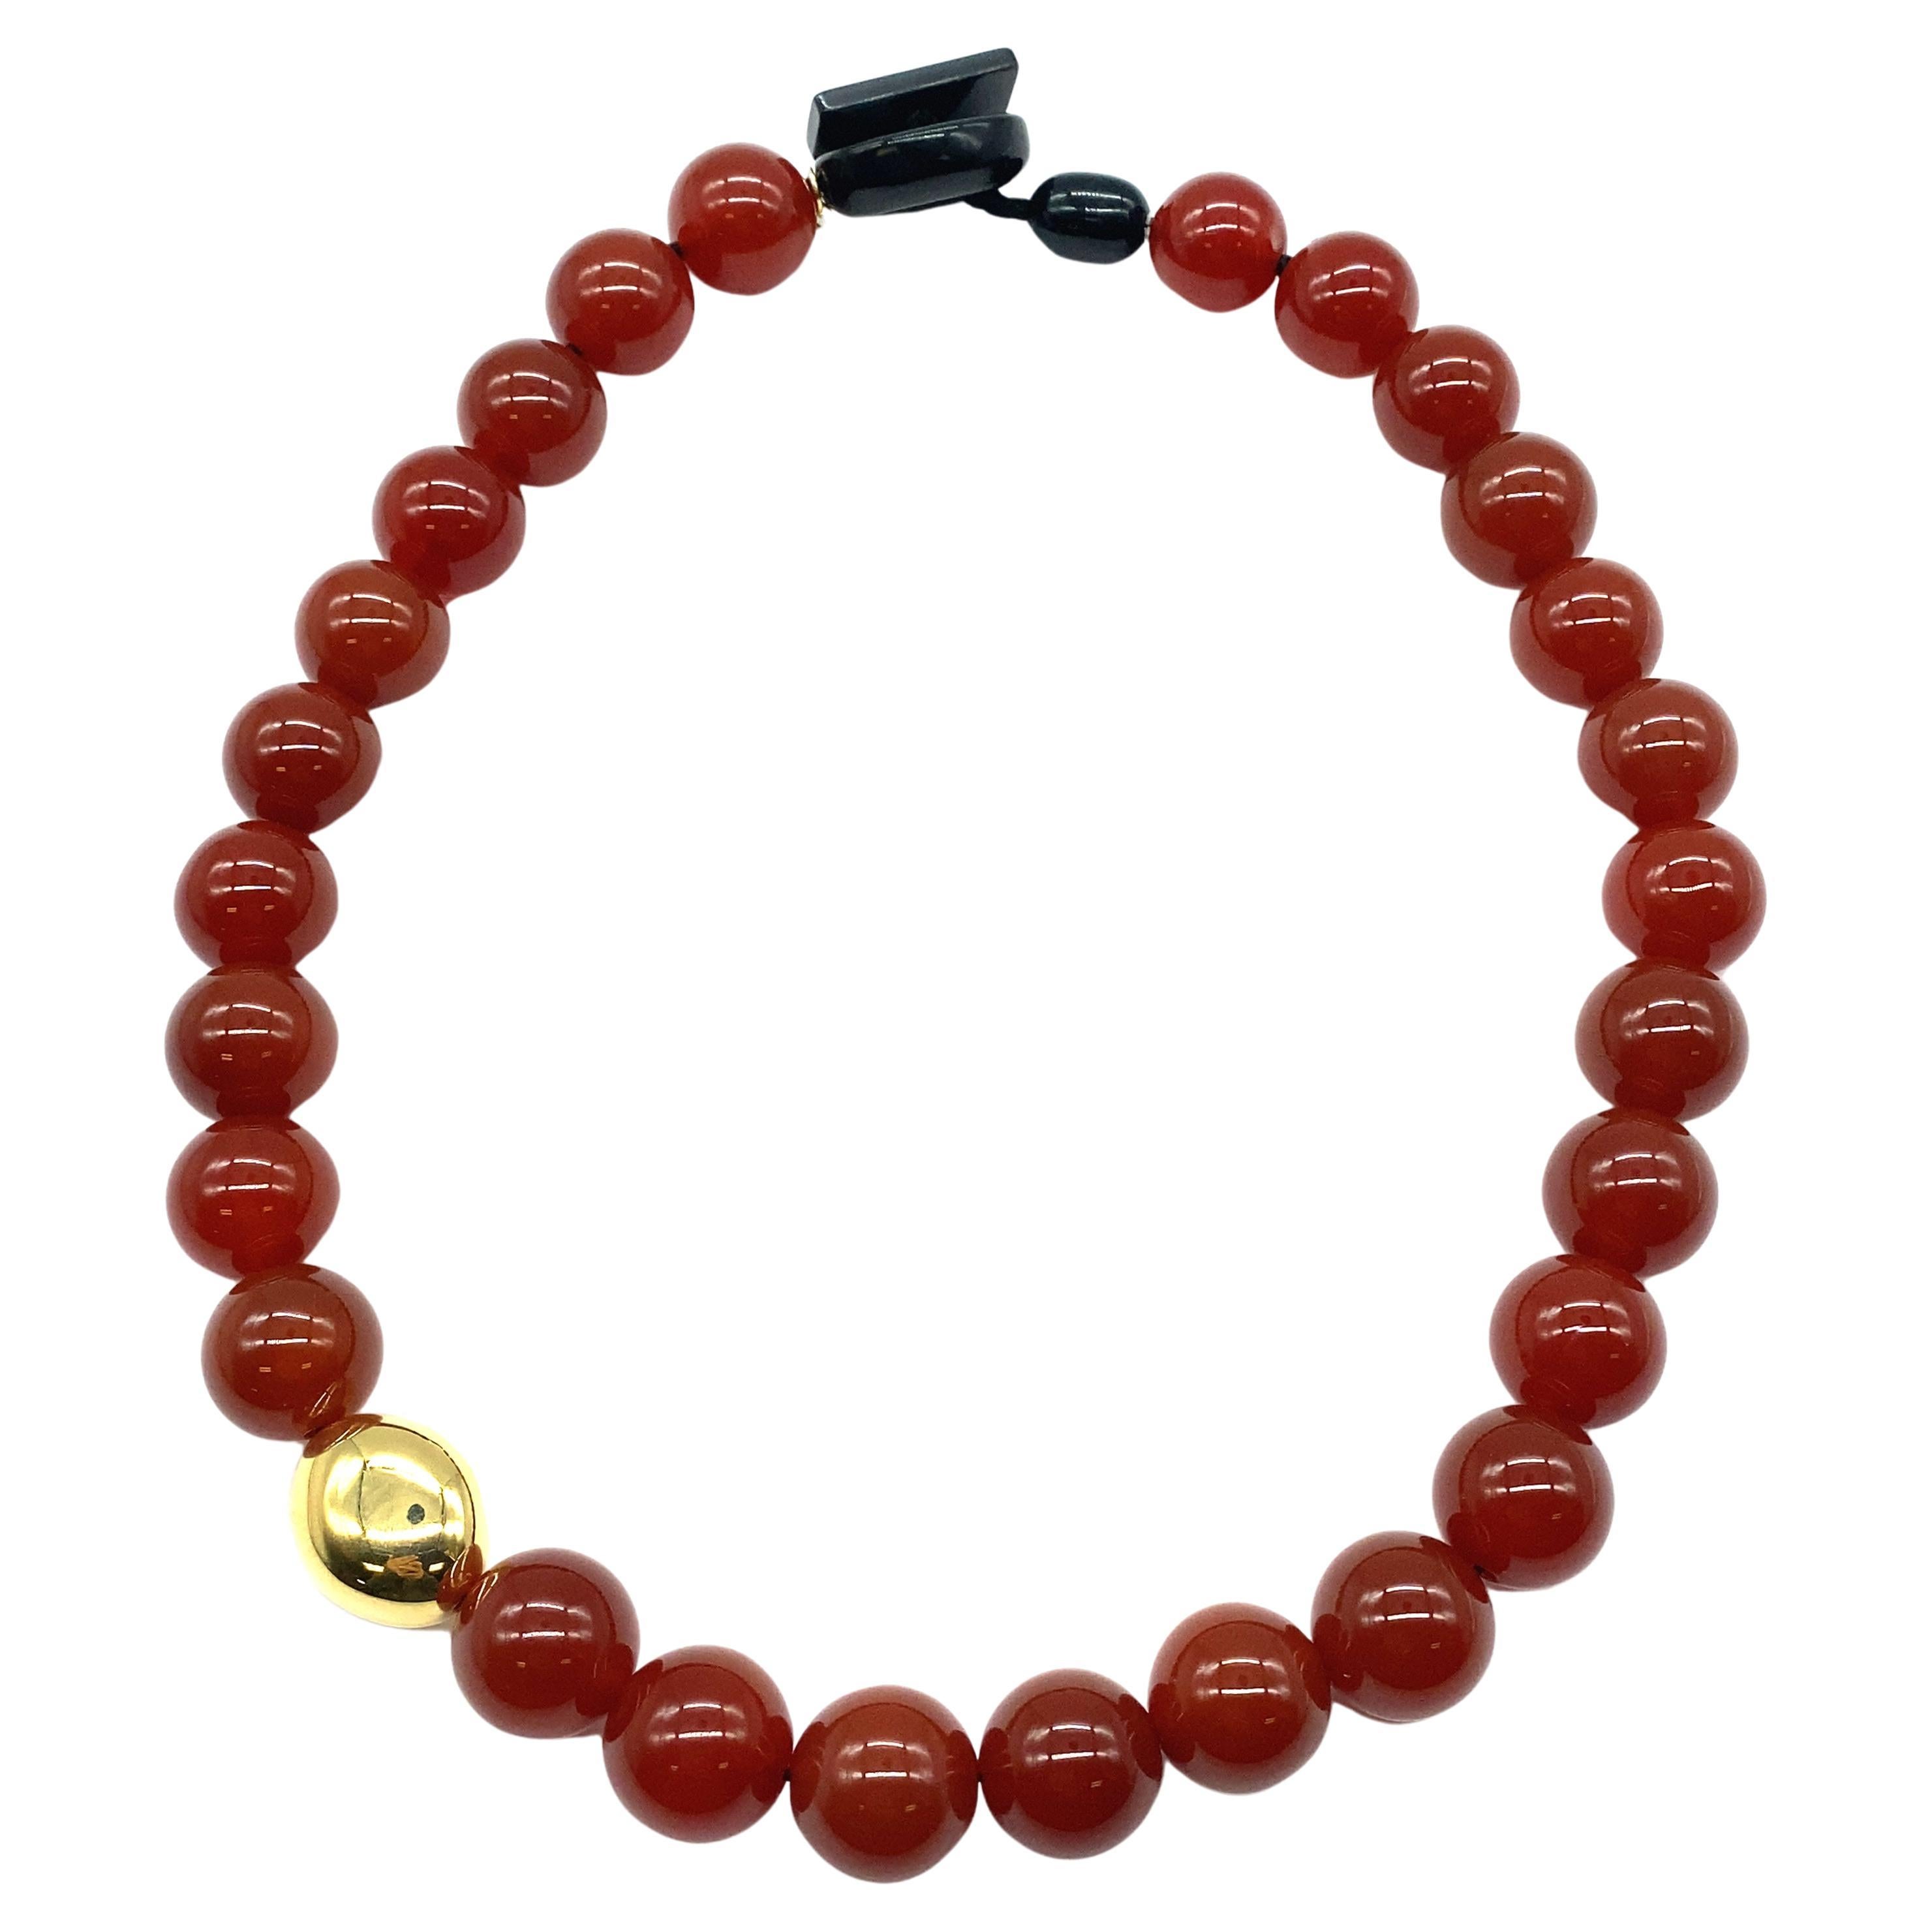 French Beaded Necklaces with Red Agate and Bakelite For Sale